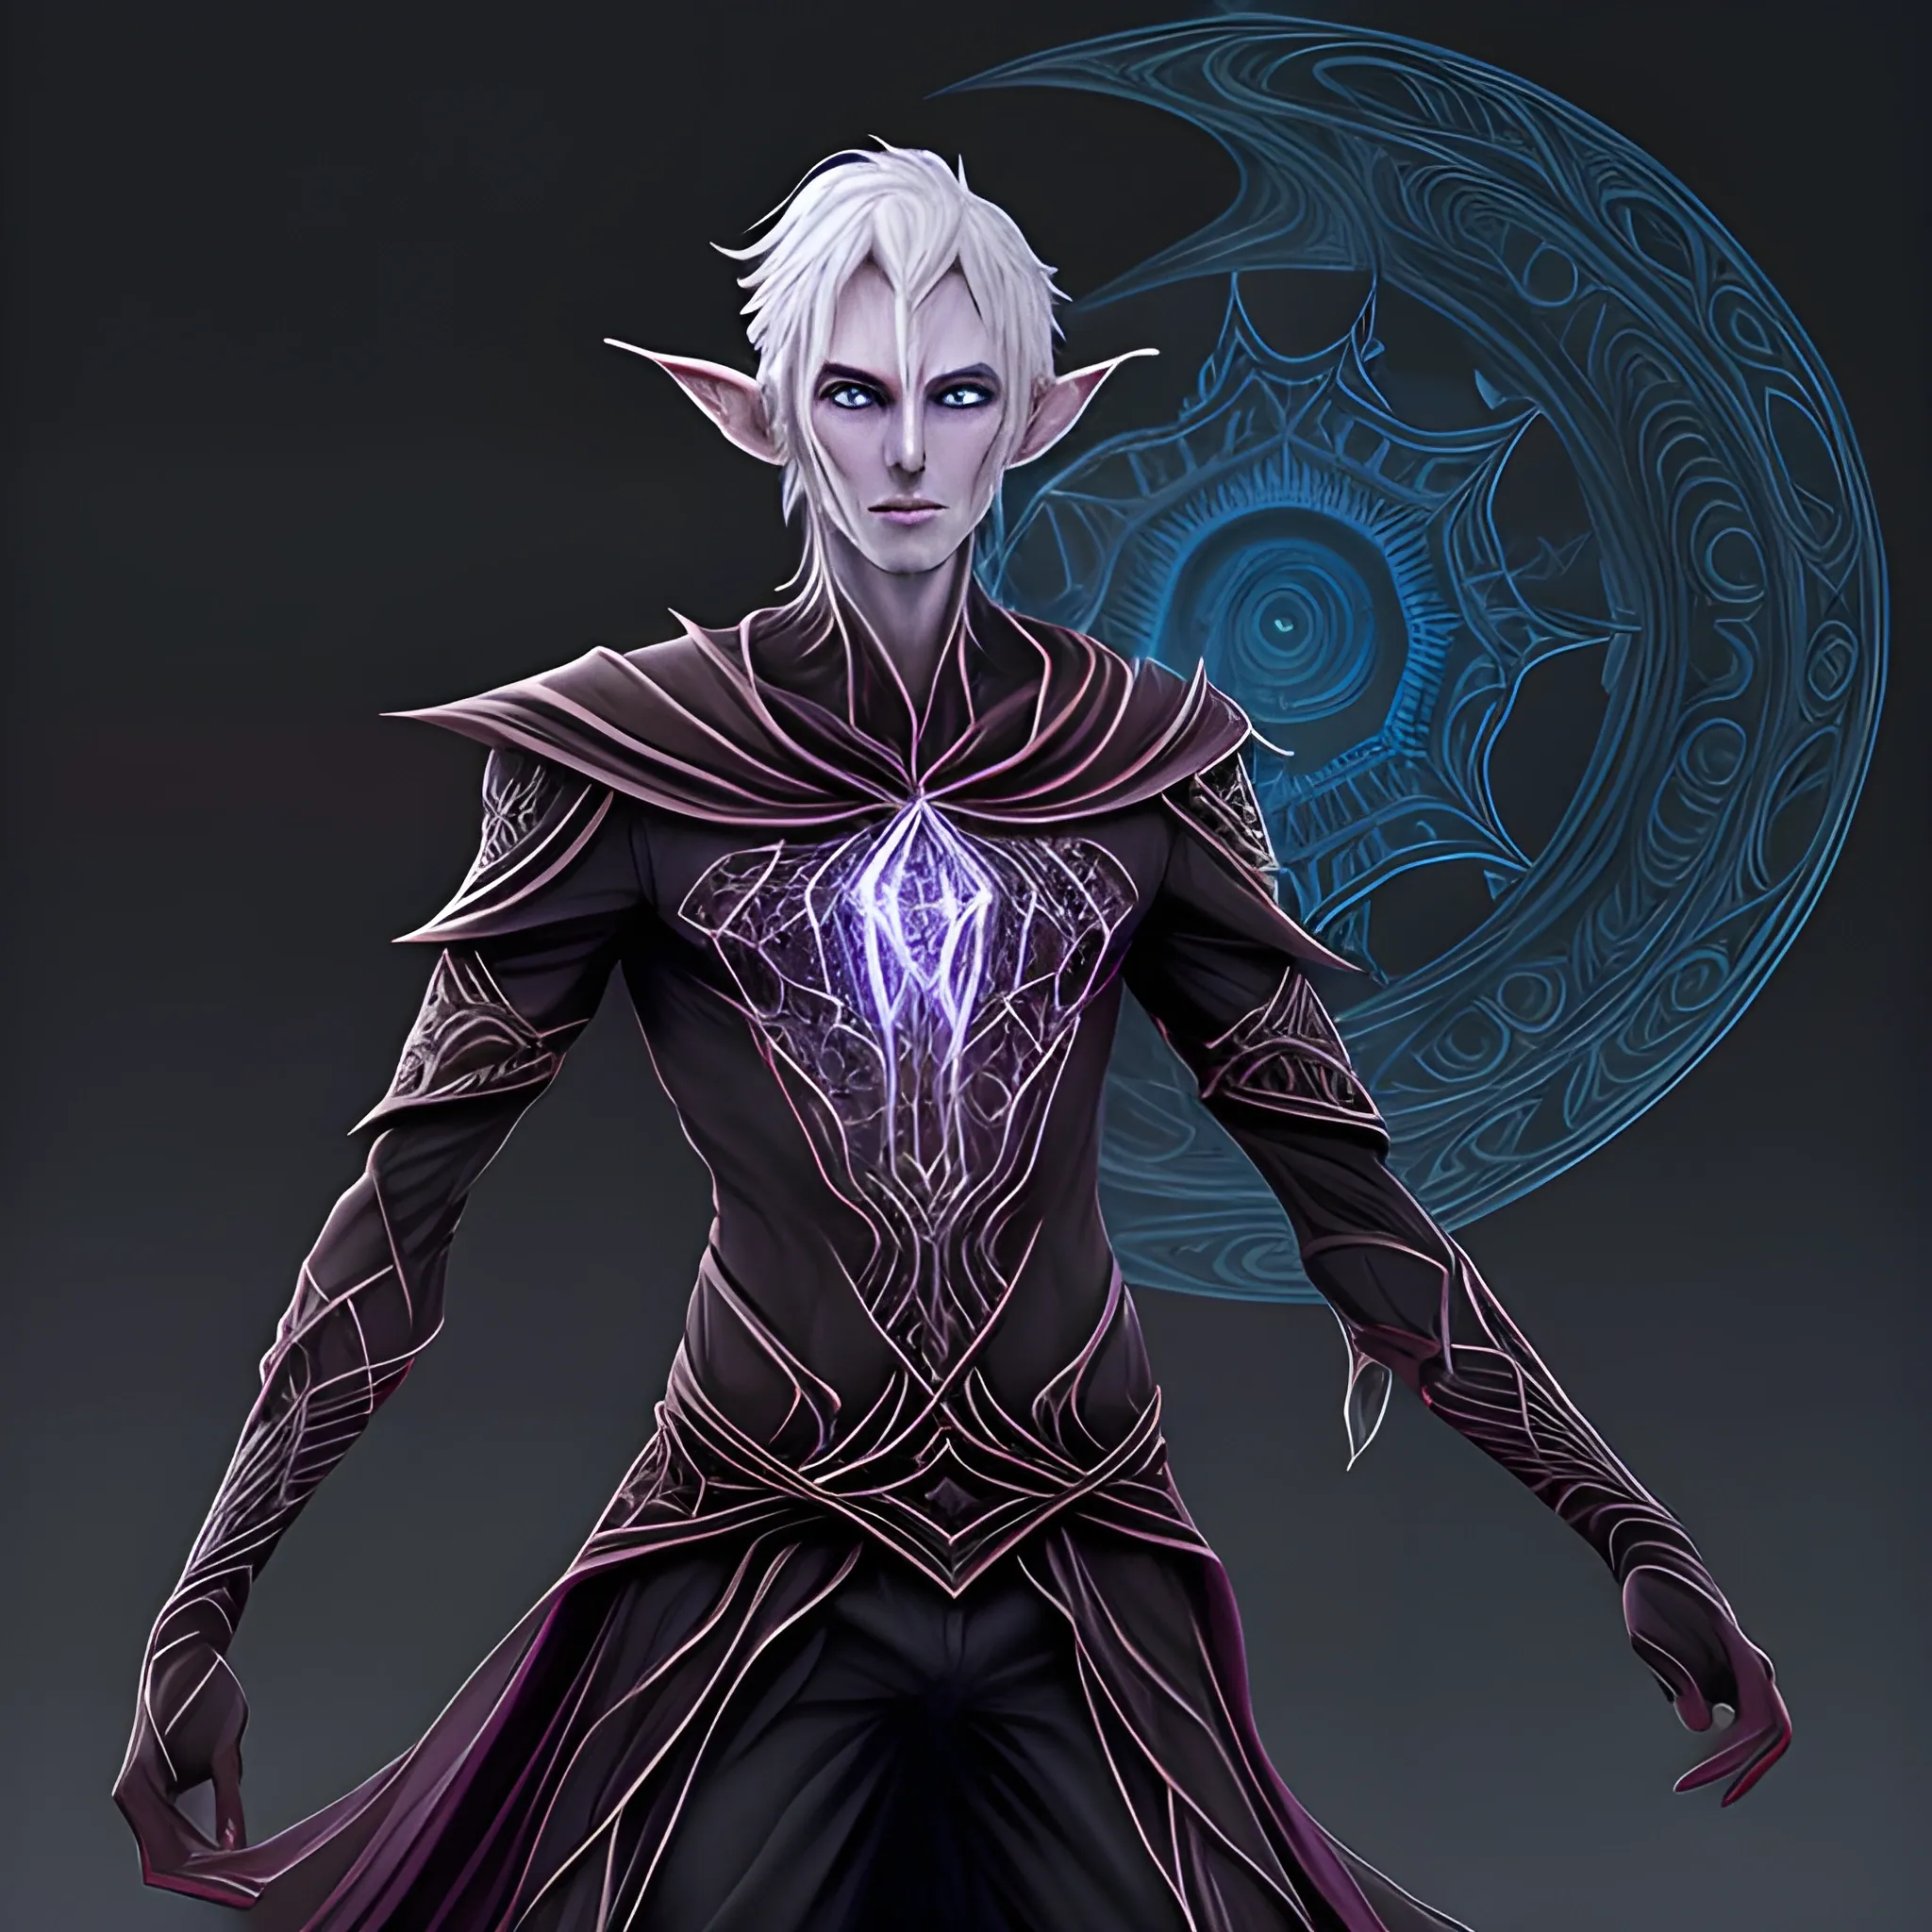 tall and slender drow elf. nearly translucent pale skin accentuates the dark veins cousing beneath his epidermis. his eyes glow with a piercing deep red, revealing the magical corruption that has consumed him. Dressed in a light-absorbing dark tunic, he showcases dark magical etchings that appear to move like dancing shadows. Mysterious symbols and web patterns adorn his attire, reflecting his mastery of corrupted magical waves.